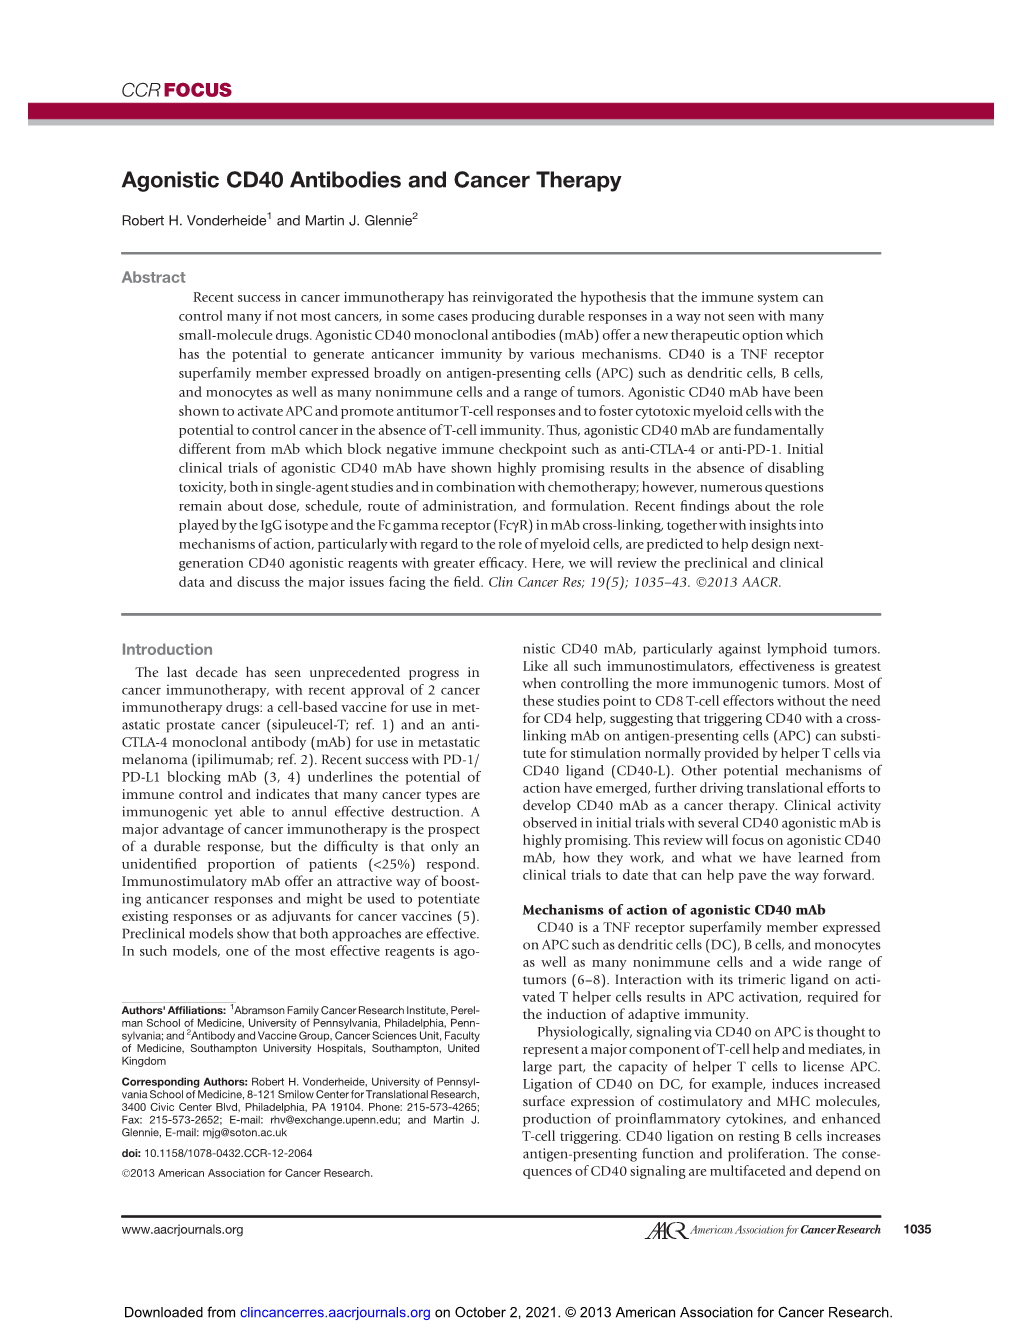 Agonistic CD40 Antibodies and Cancer Therapy